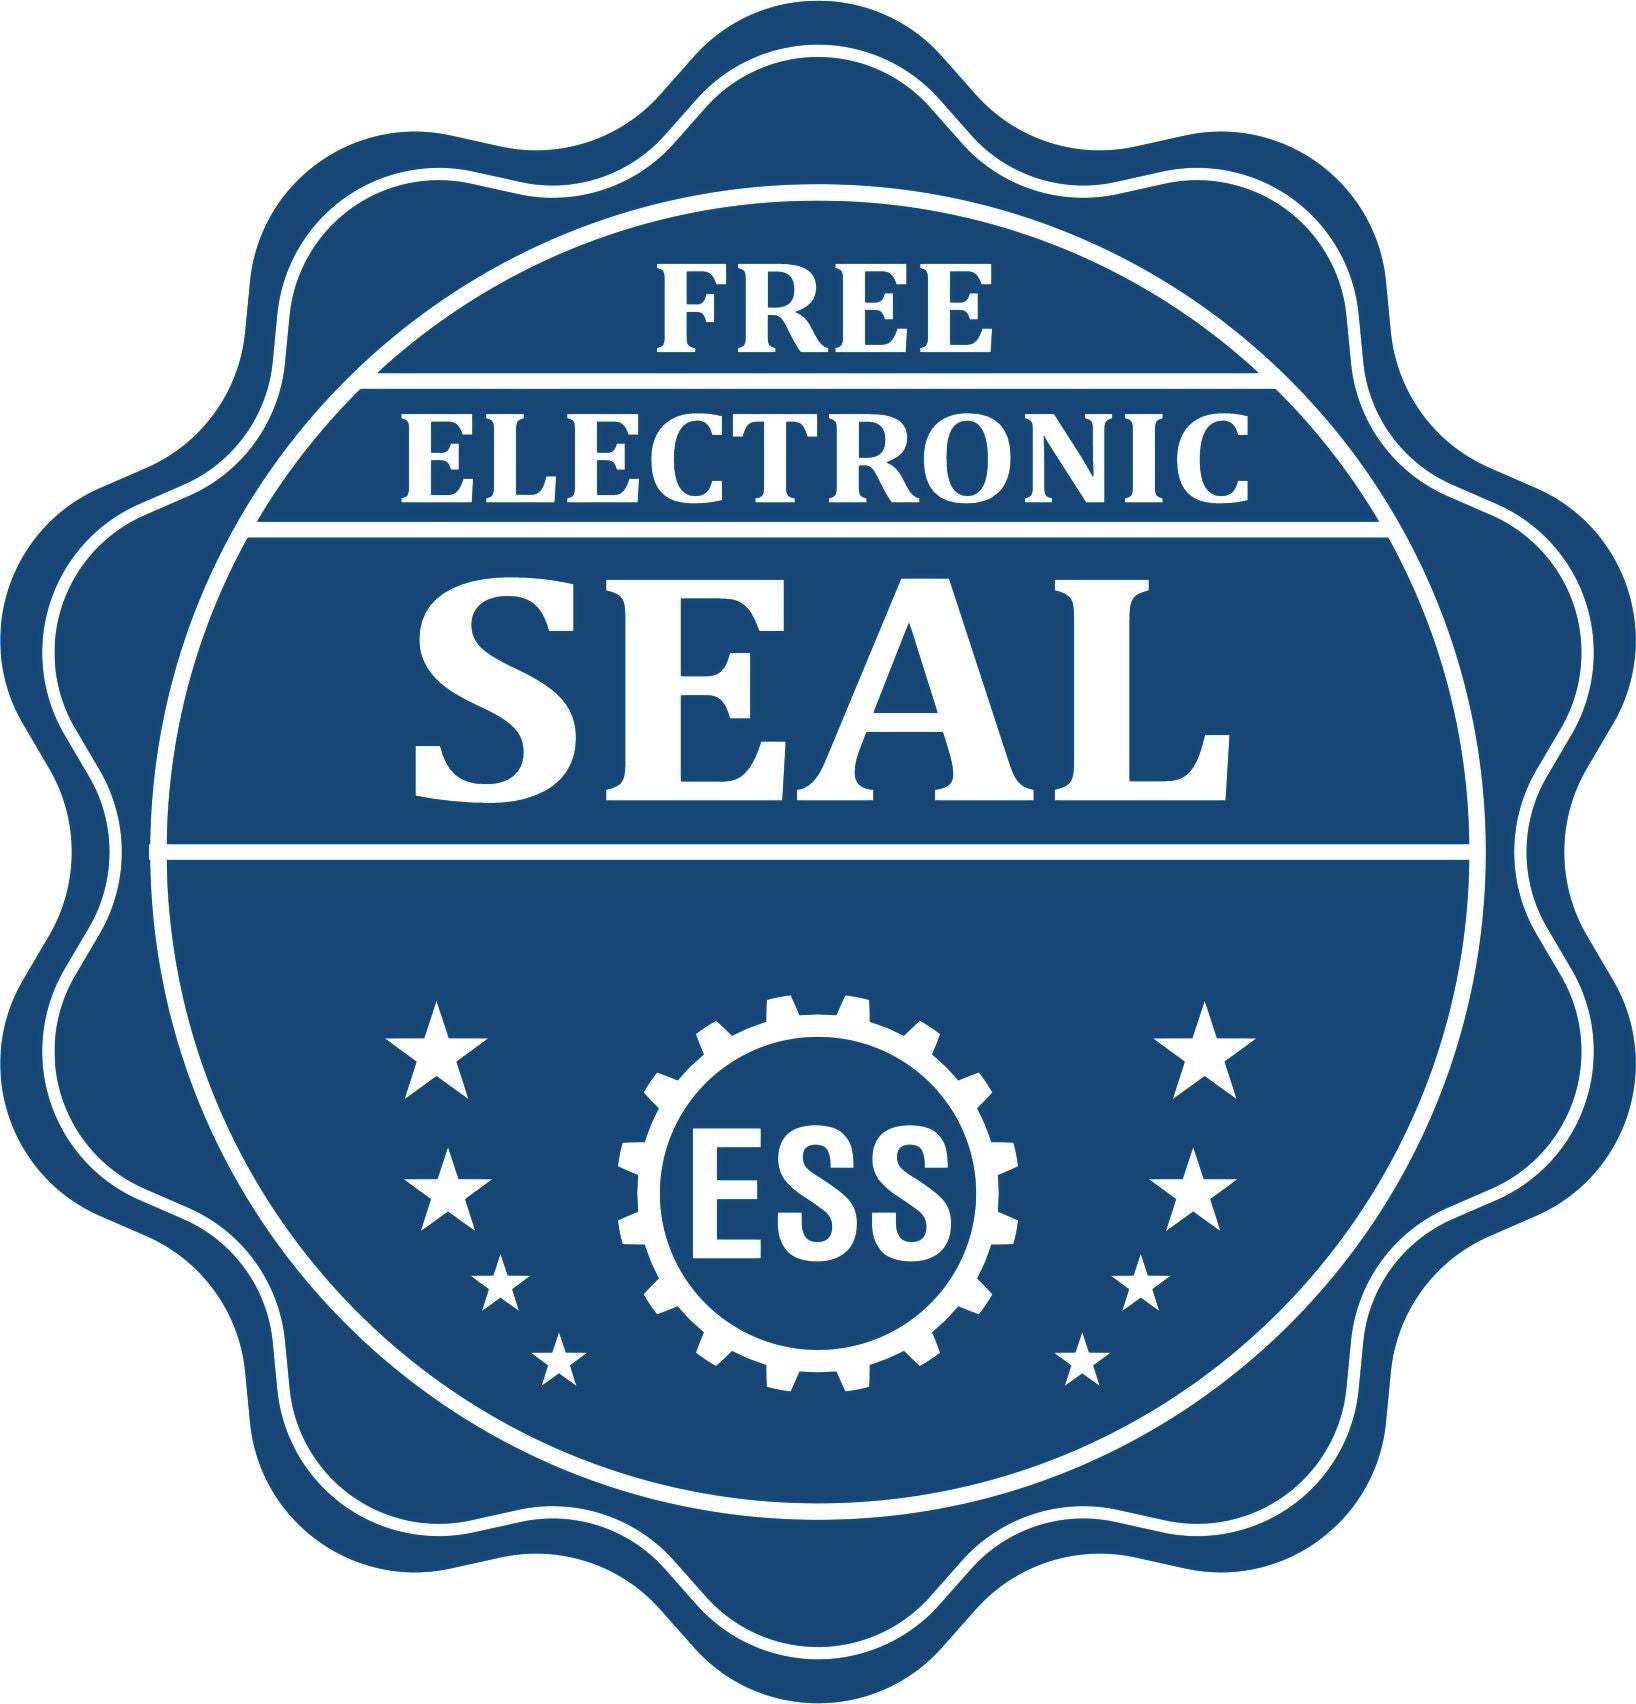 A badge showing a free electronic seal for the PSI New York Notary Stamp with stars and the ESS gear on the emblem.